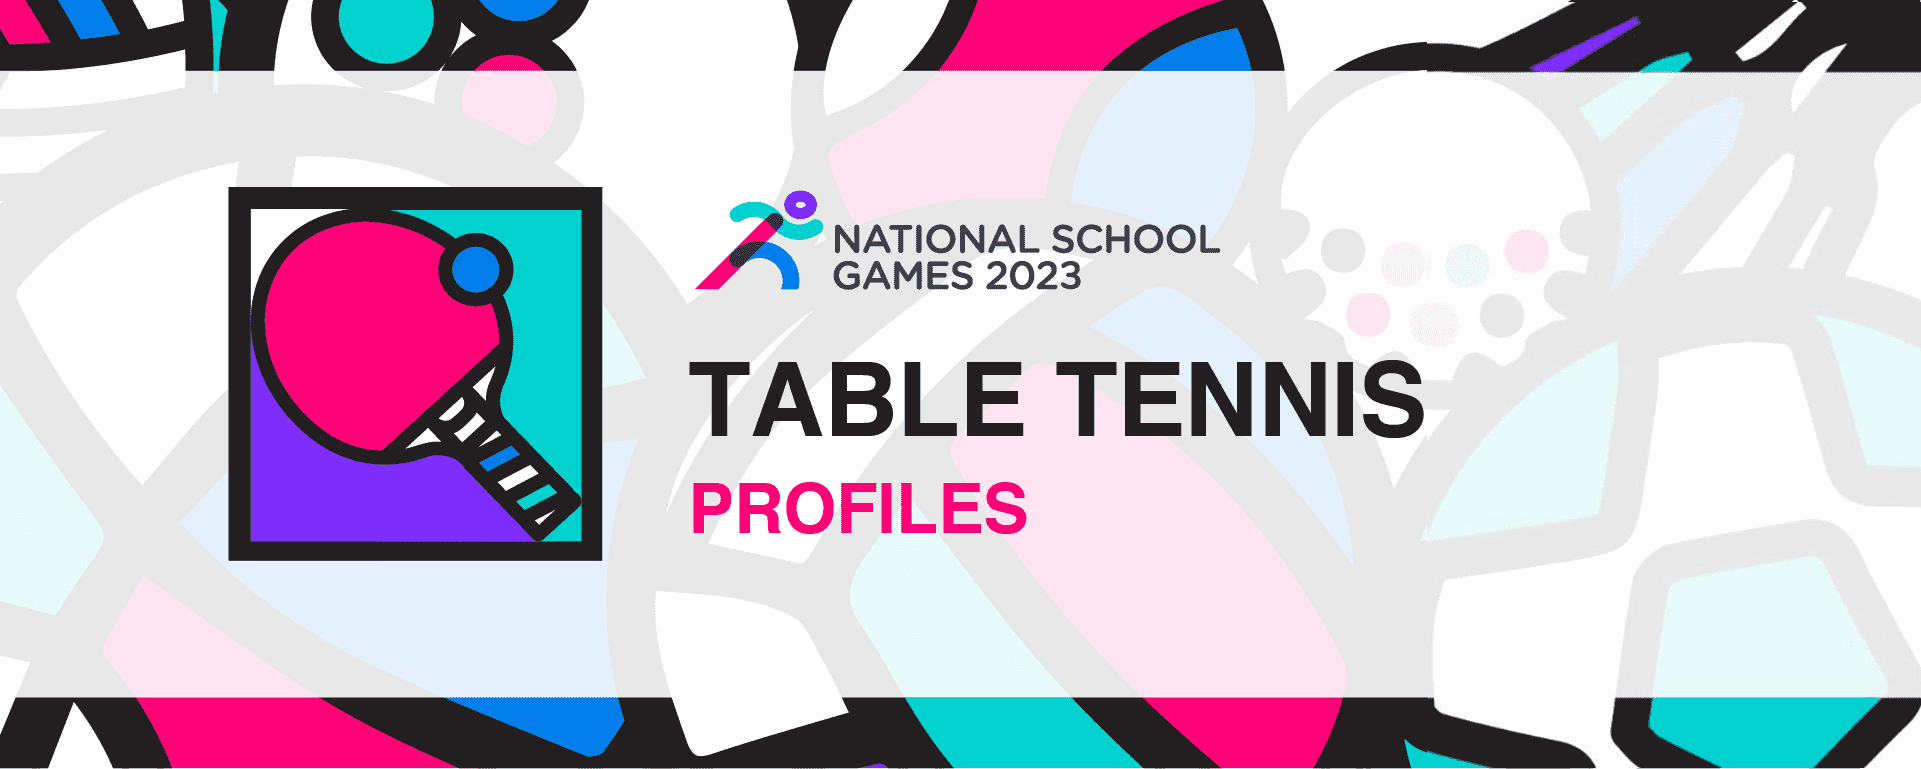 National School Games 2023 | Table Tennis | Profile